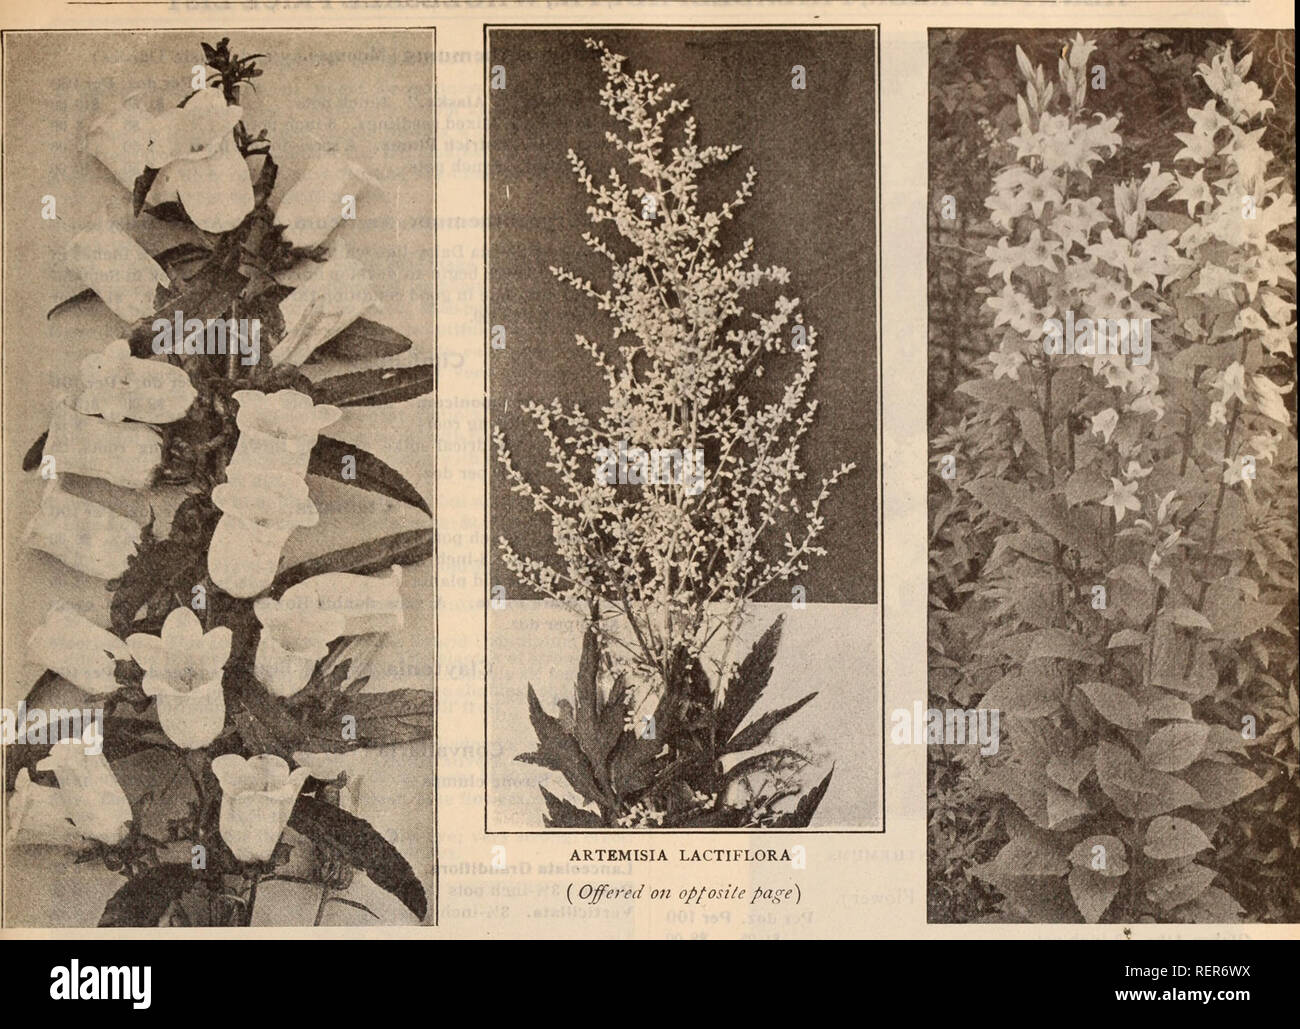 . Dreer's wholesale price list / Henry A. Dreer.. Nursery Catalogue. HENRY A. PREER, PHILADELPHIA, PA., WHOLESALE PRICE LIST 51. CAMPANULA MEDIUM (Canterbury Bells) CAMPANULA PYRAMIDALS Astilbe. Davidil. Feathery plumes of deep rose violet flowers during July and August. $L50 per doz.; $10.00 per 100. Qrandis. Panicles of white flowers. 20 cts. each; $2.00 per doz.; $15.00 per 100. Astrantia (Master-Wort). Per doz. Per 100 Major. 3-inch pots $2 00 $15 00 Campanula (Bell-flower). Baptisia (False Indigo). Australls. Strong plants 1 00 Tinctoria. 00 Bellis (English Daisies). Double White and Pink Stock Photo